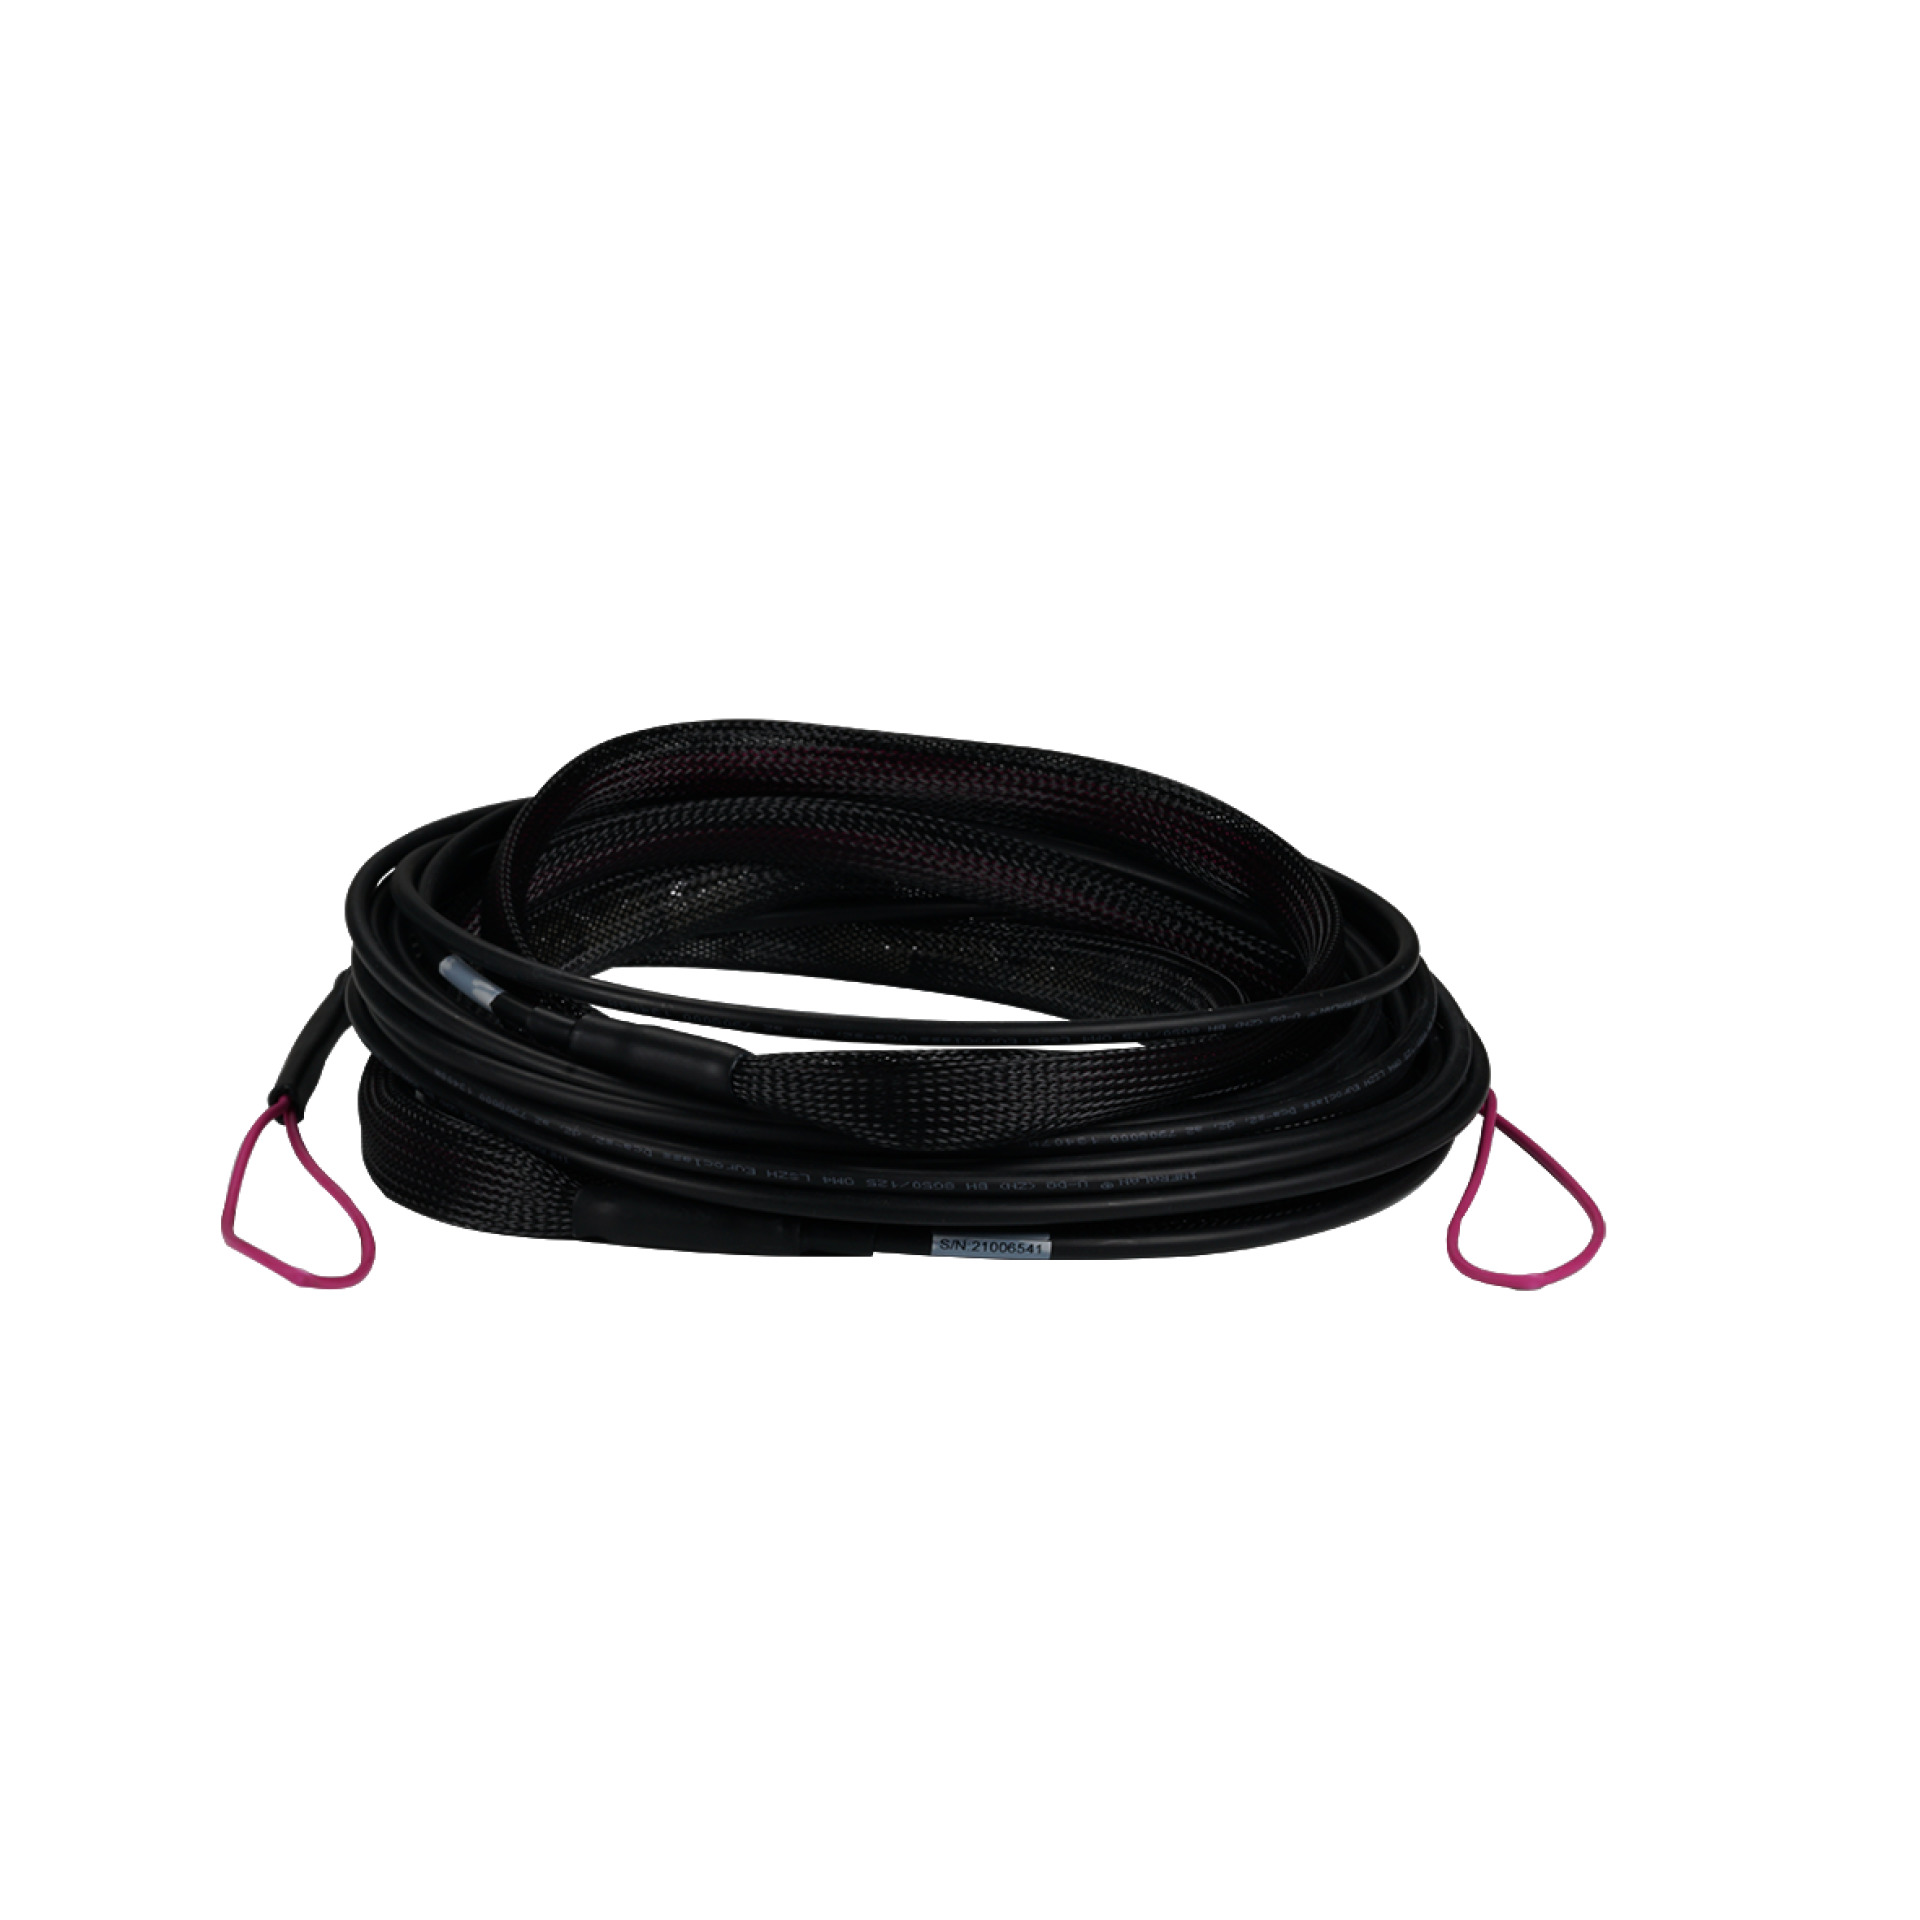 Trunk cable U-DQ(ZN)BH 4G 50/125, SC/SC OM4 150m